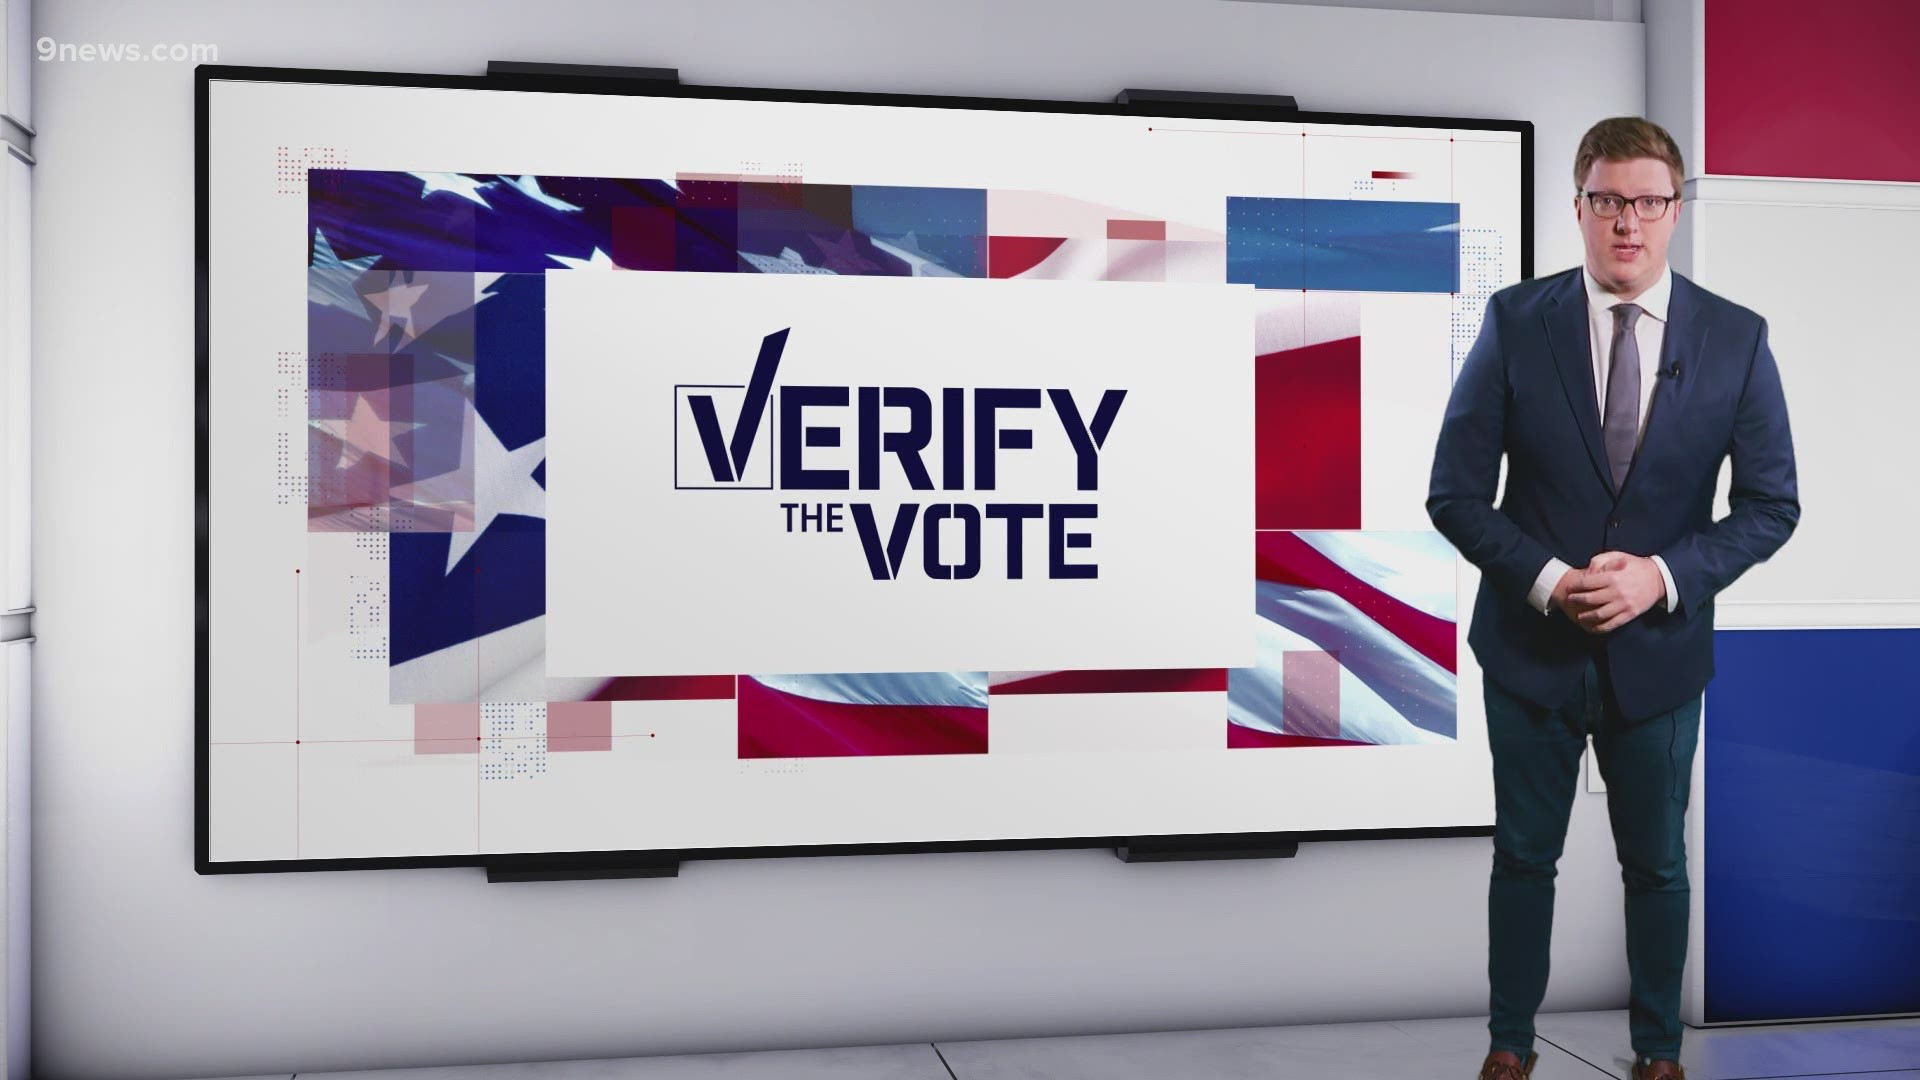 The Verify team looks into some of the claims of voter fraud made by President Trump on Thursday.